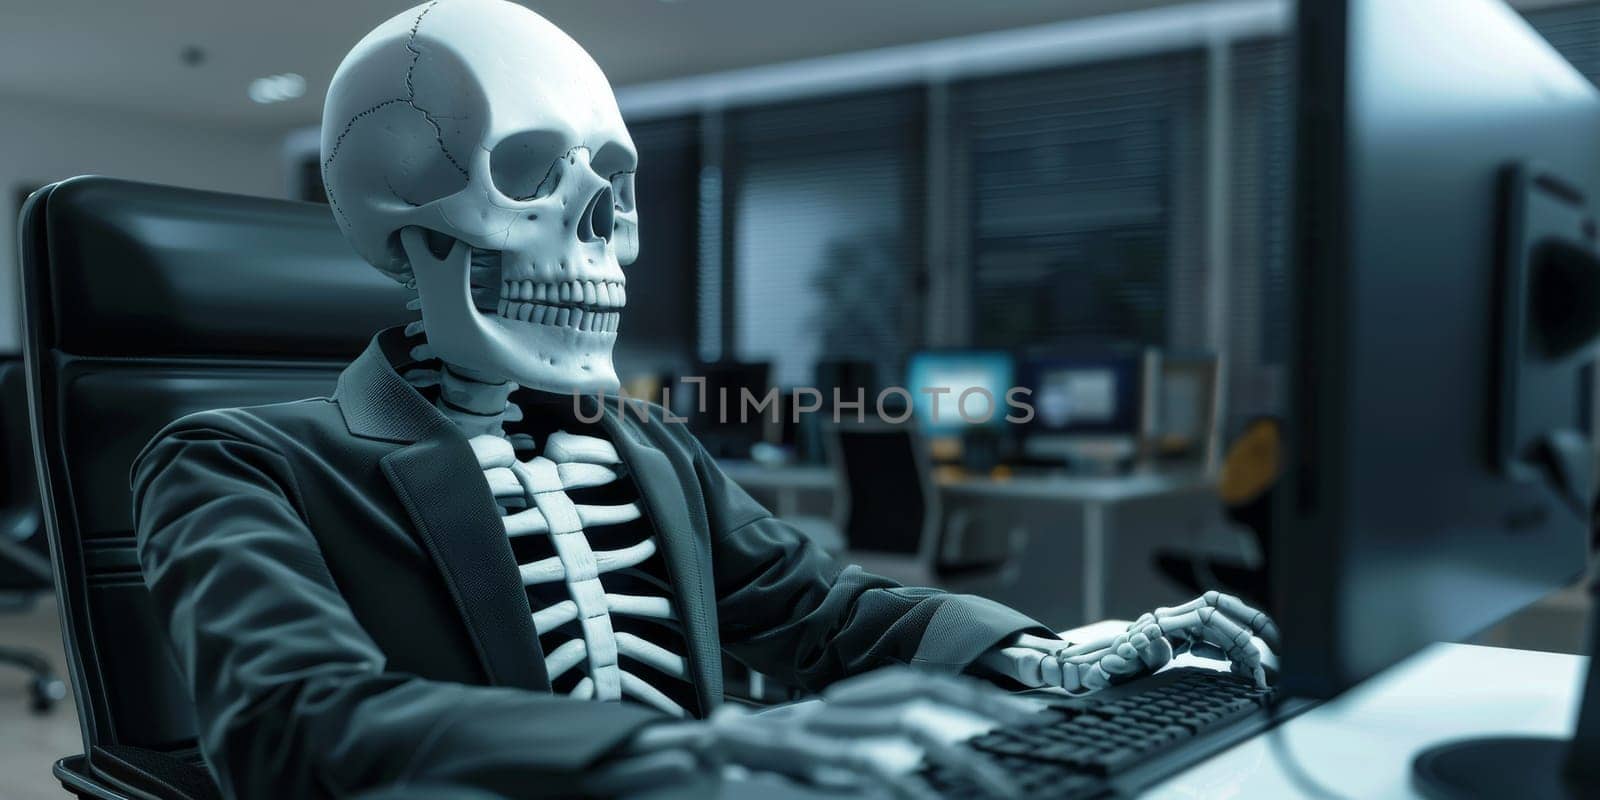 Skeleton in a suit working on PC in the office, result of hard-working